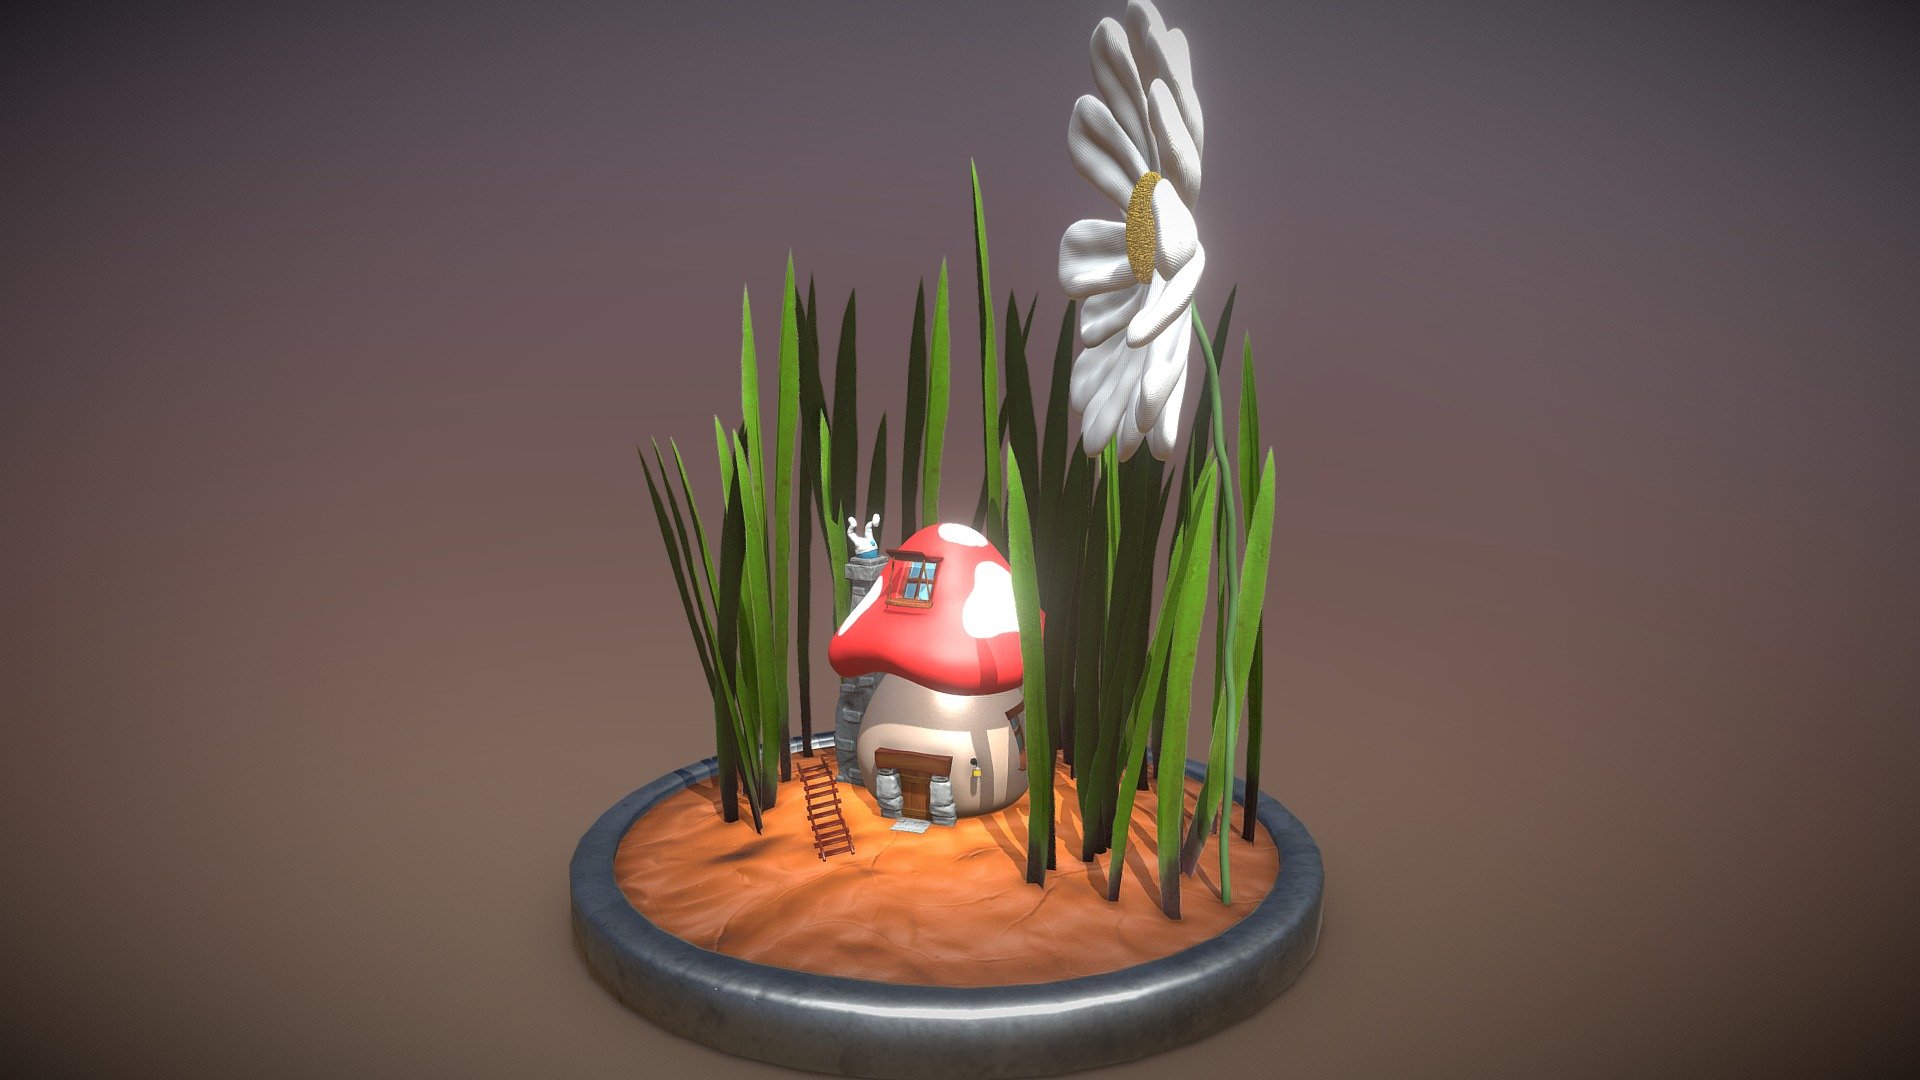 Here is my entry for the Sketchfab September challenge mushroom theme, a smurf house.

See the entire project here: https://www.artstation.com/artwork/ybmgx8 - Sketchfab Challenge: Mushrooms • Smurf House - 3D model by Mr_Z (@hamidz90) 3d model